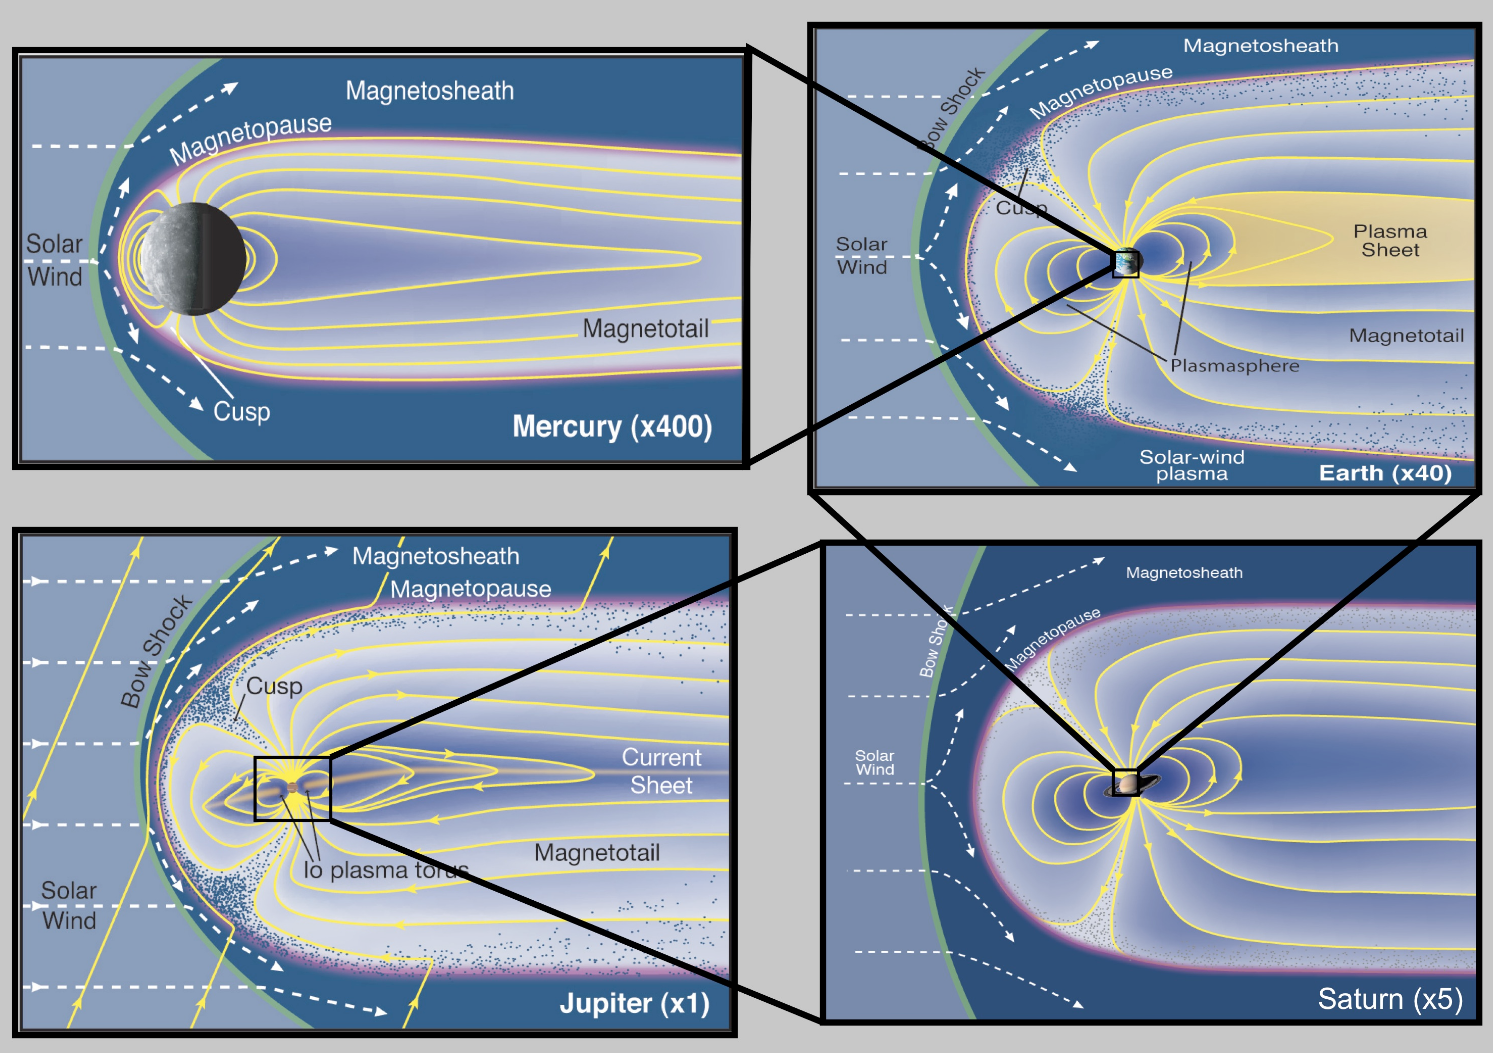 comparasion of diffrent magnetosphere